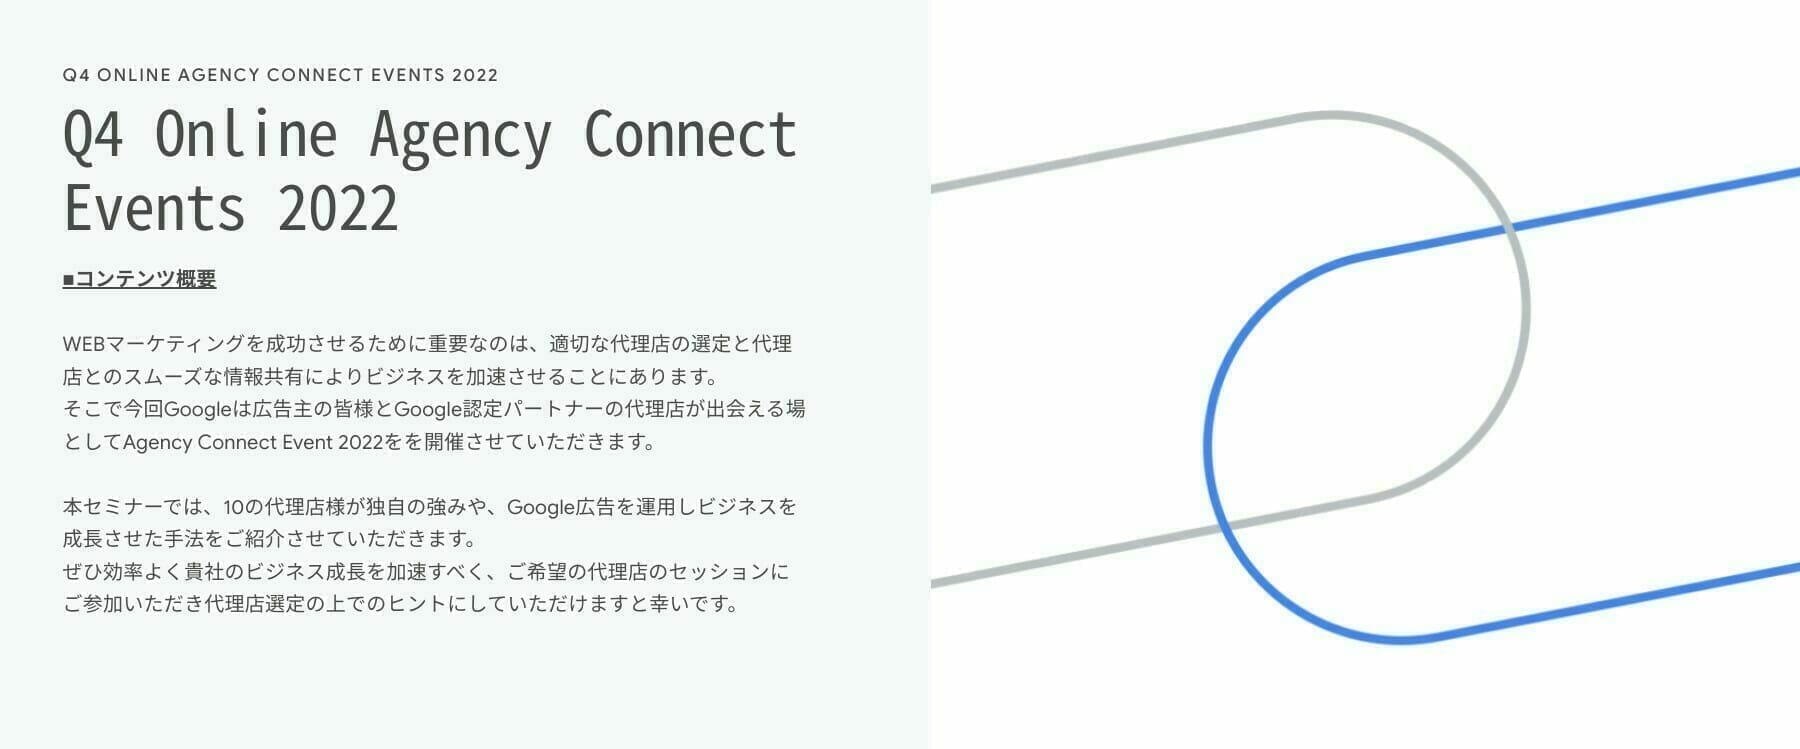 [Google Ads] Q4 Online Agency Connect Events 2022